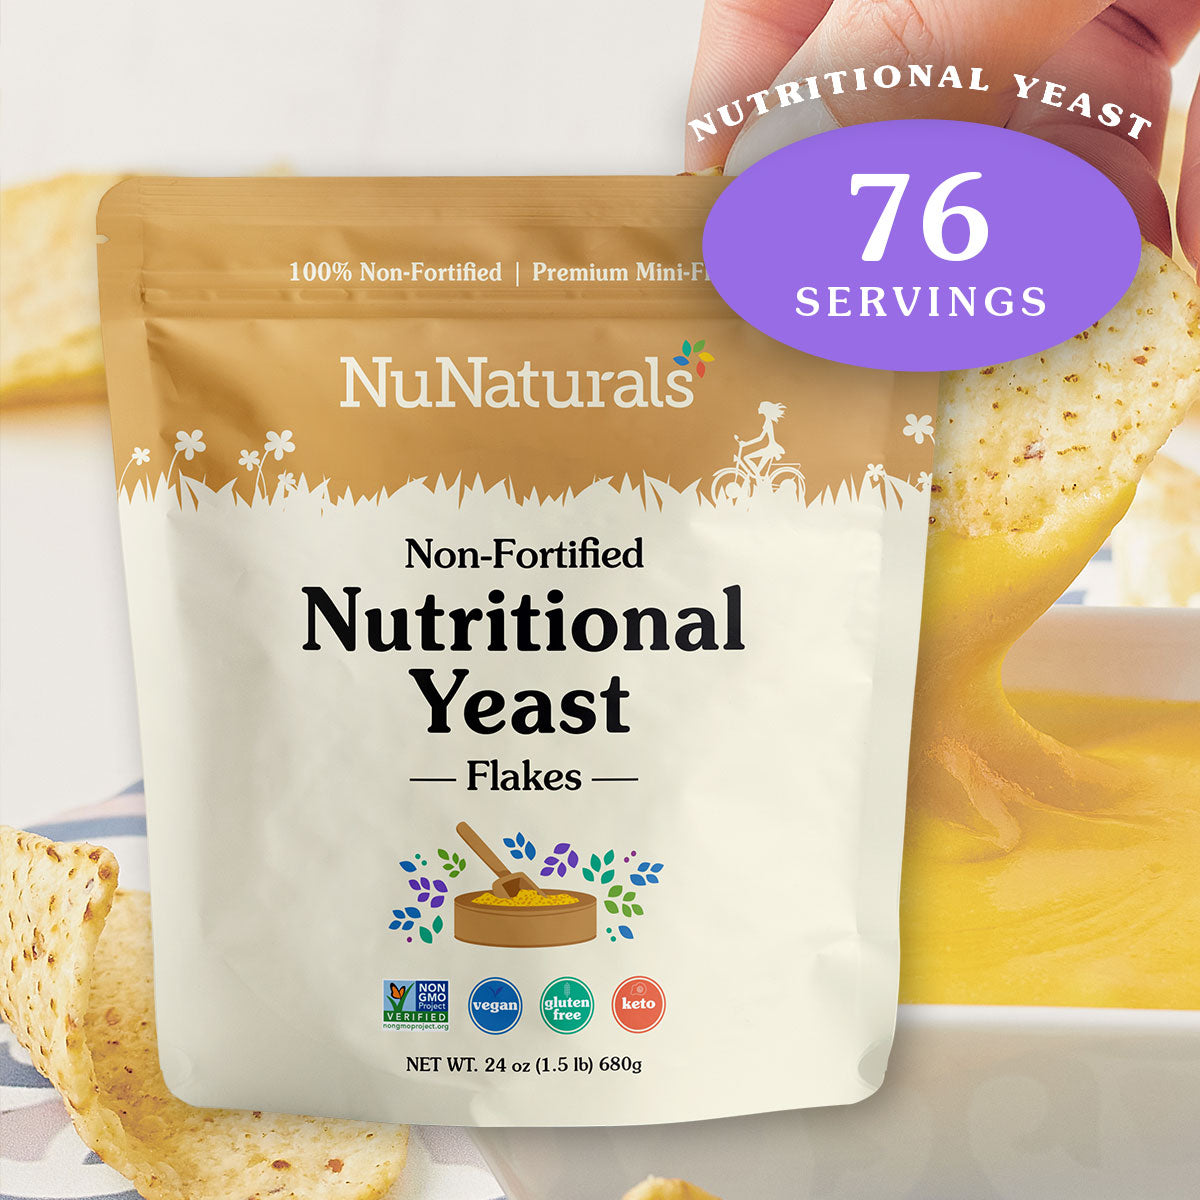 Non-Fortified Nutritional Yeast Flakes 24 oz